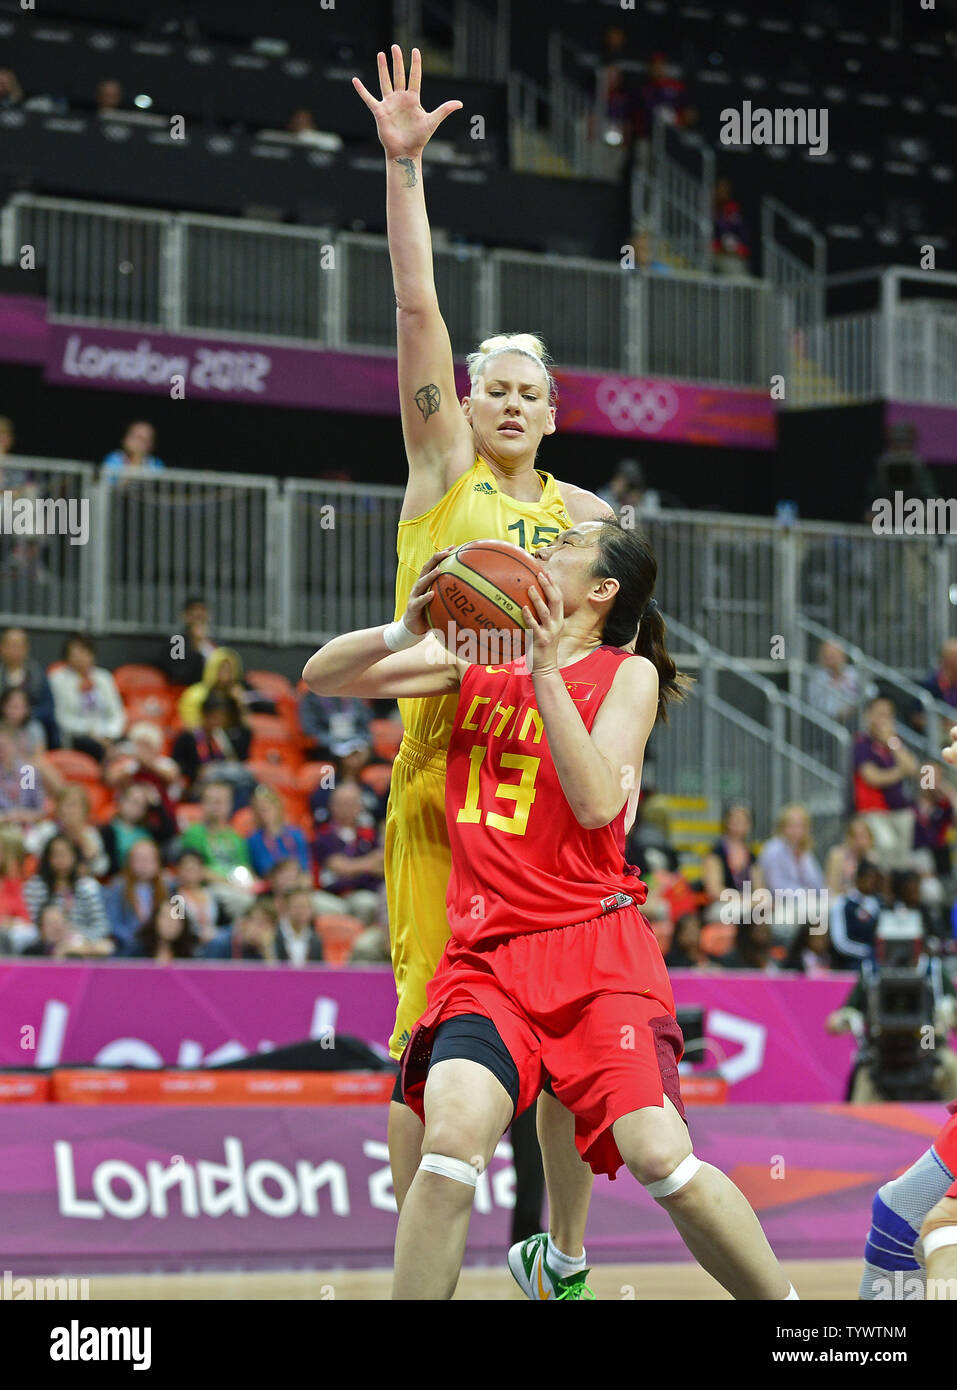 Forward Xiaoli Chen (13) of China looks to shoot over forward/center Lauren Jackson (15) of Australia in the Women's Basketball quarterfinal at the London 2012 Summer Olympics on August 7, 2012 in London.   UPI/Ron Sachs Stock Photo